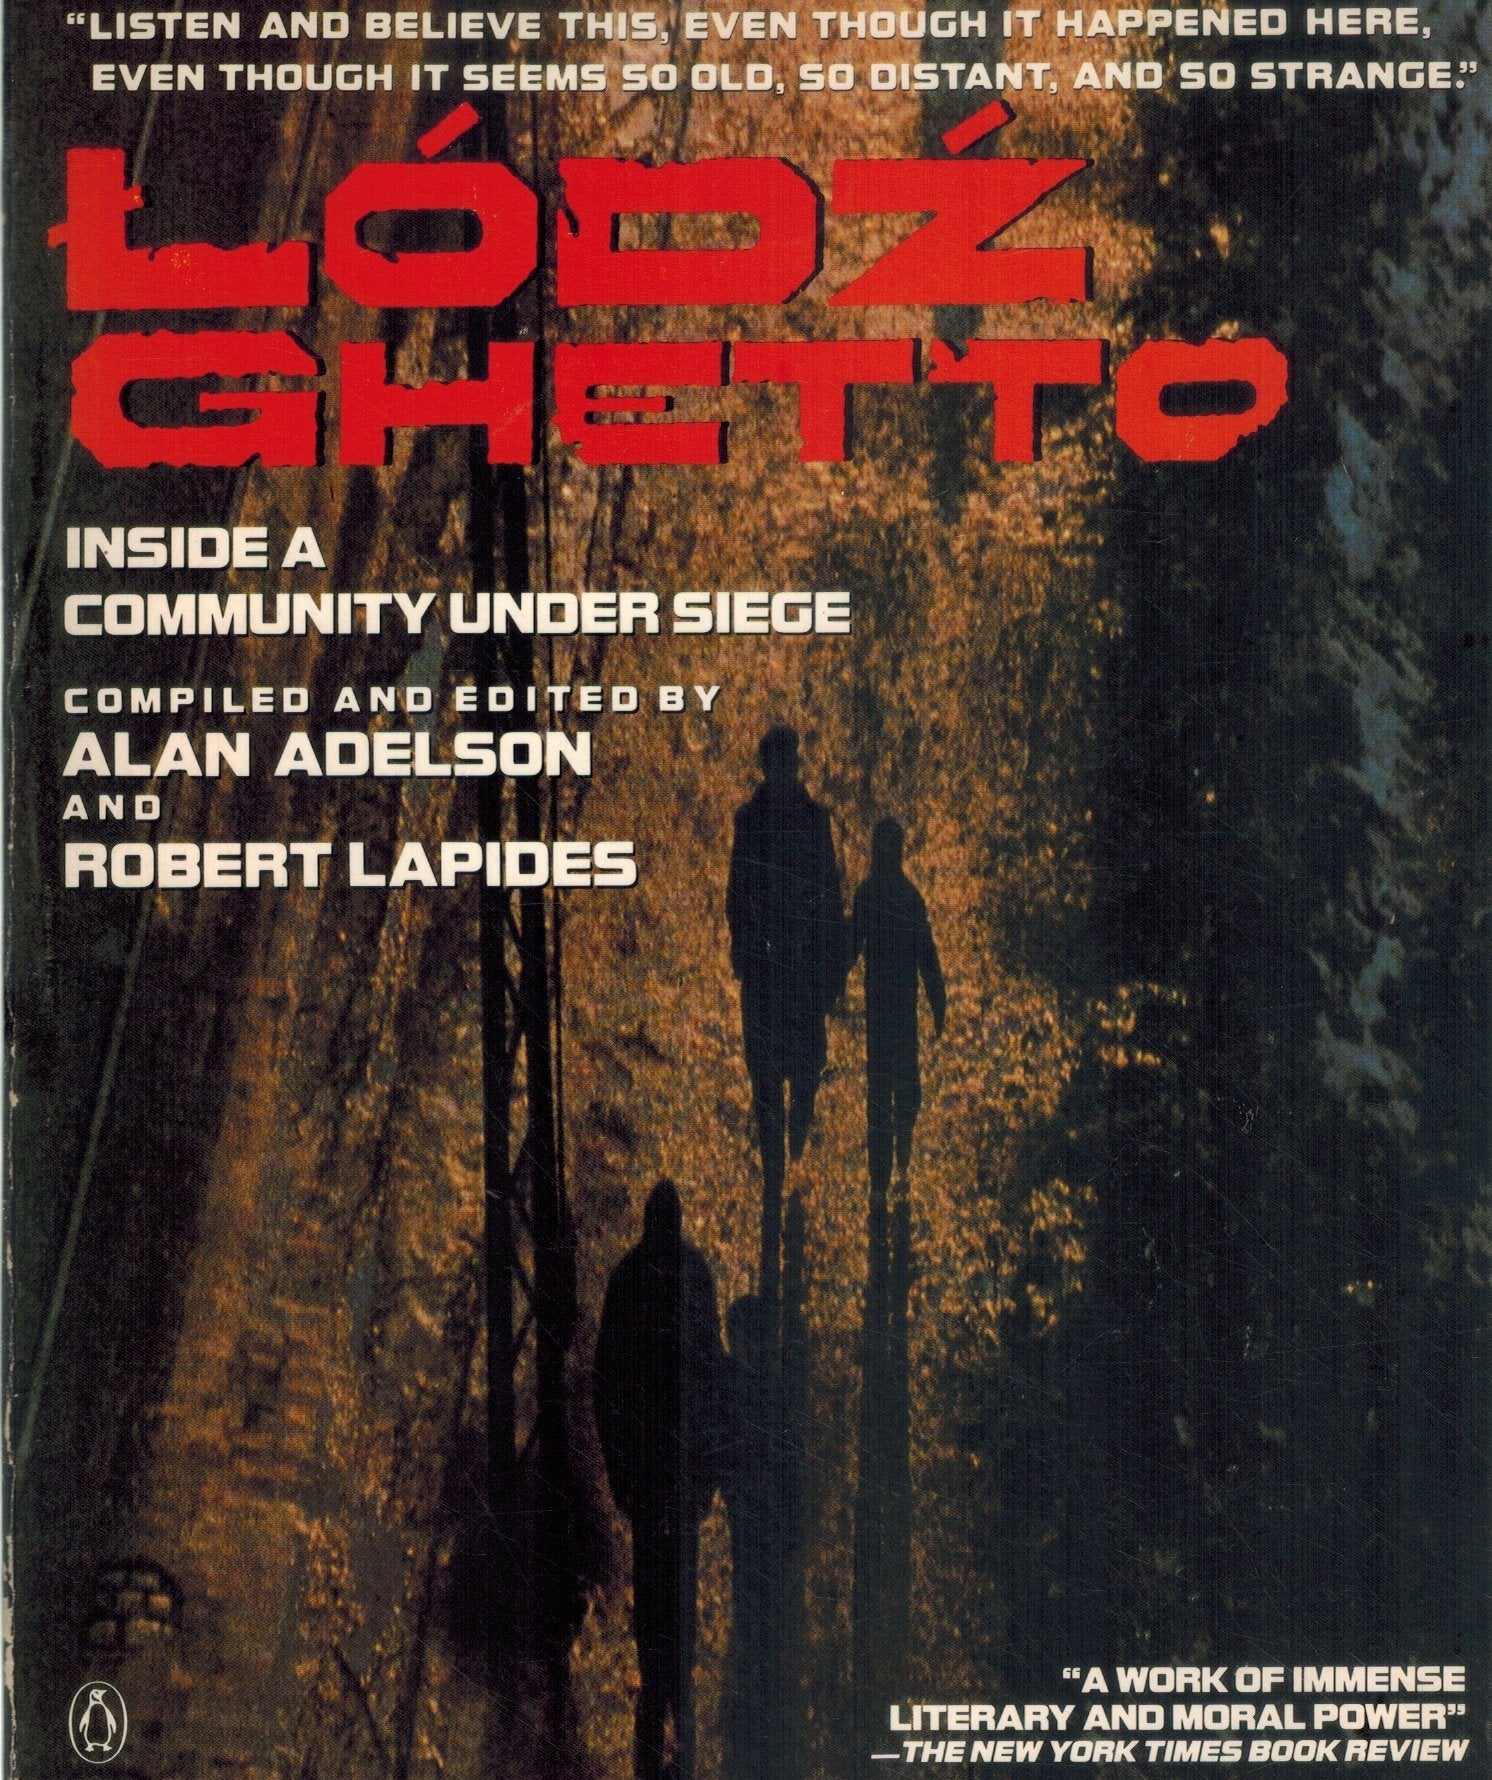 LODZ GHETTO Inside a Community under Siege  by Adelson, Alan & Robert Lapides